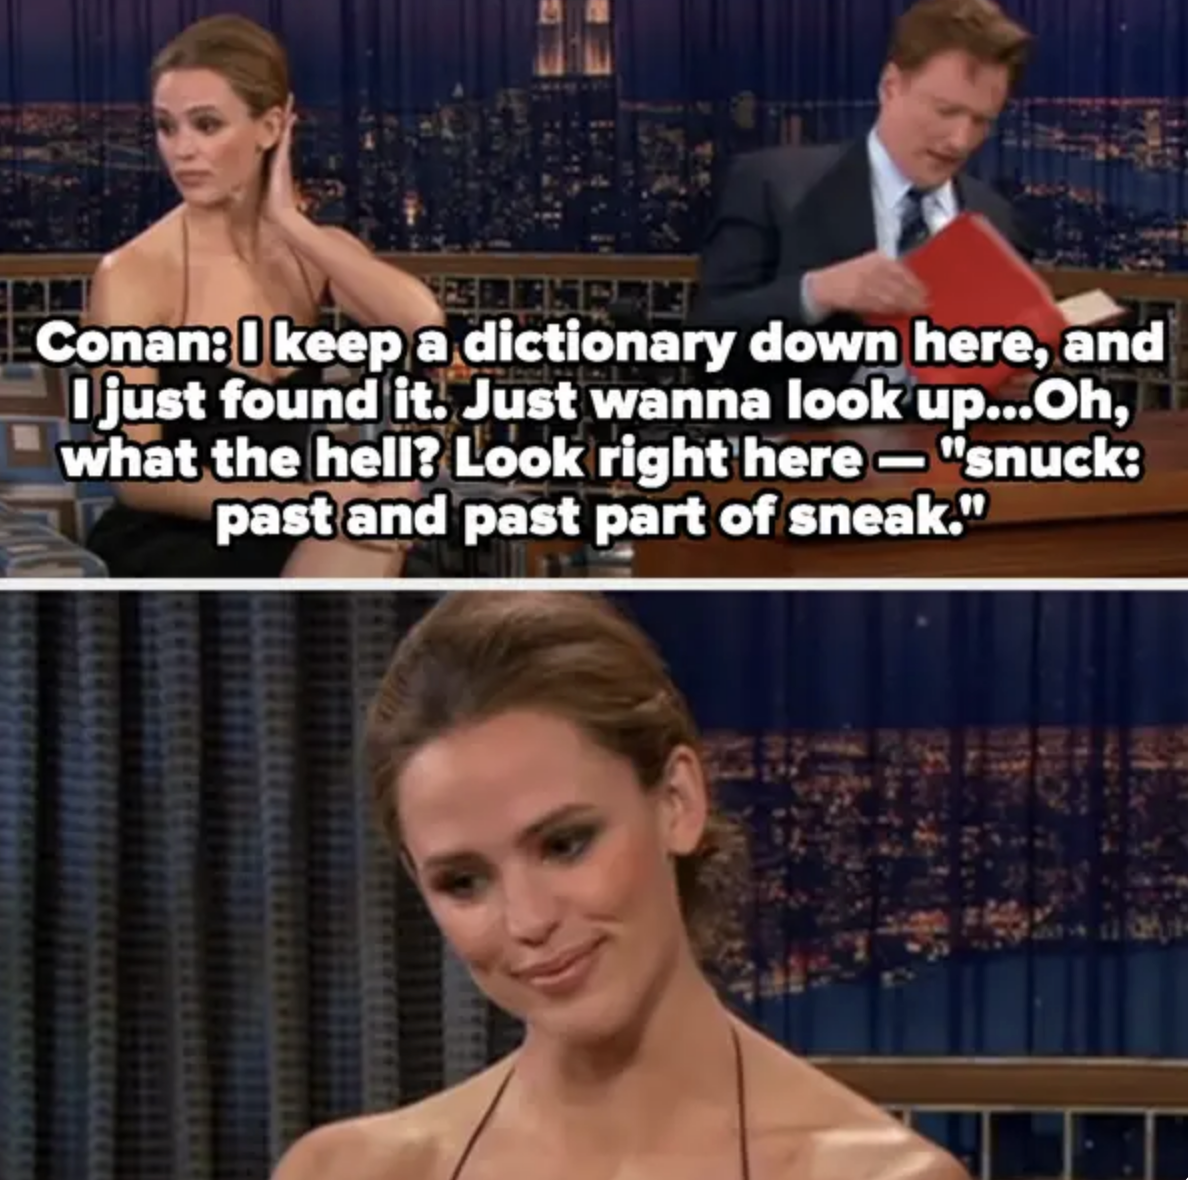 Conan points on &quot;snuck&quot; in the dictionary, and Jennifer looks away